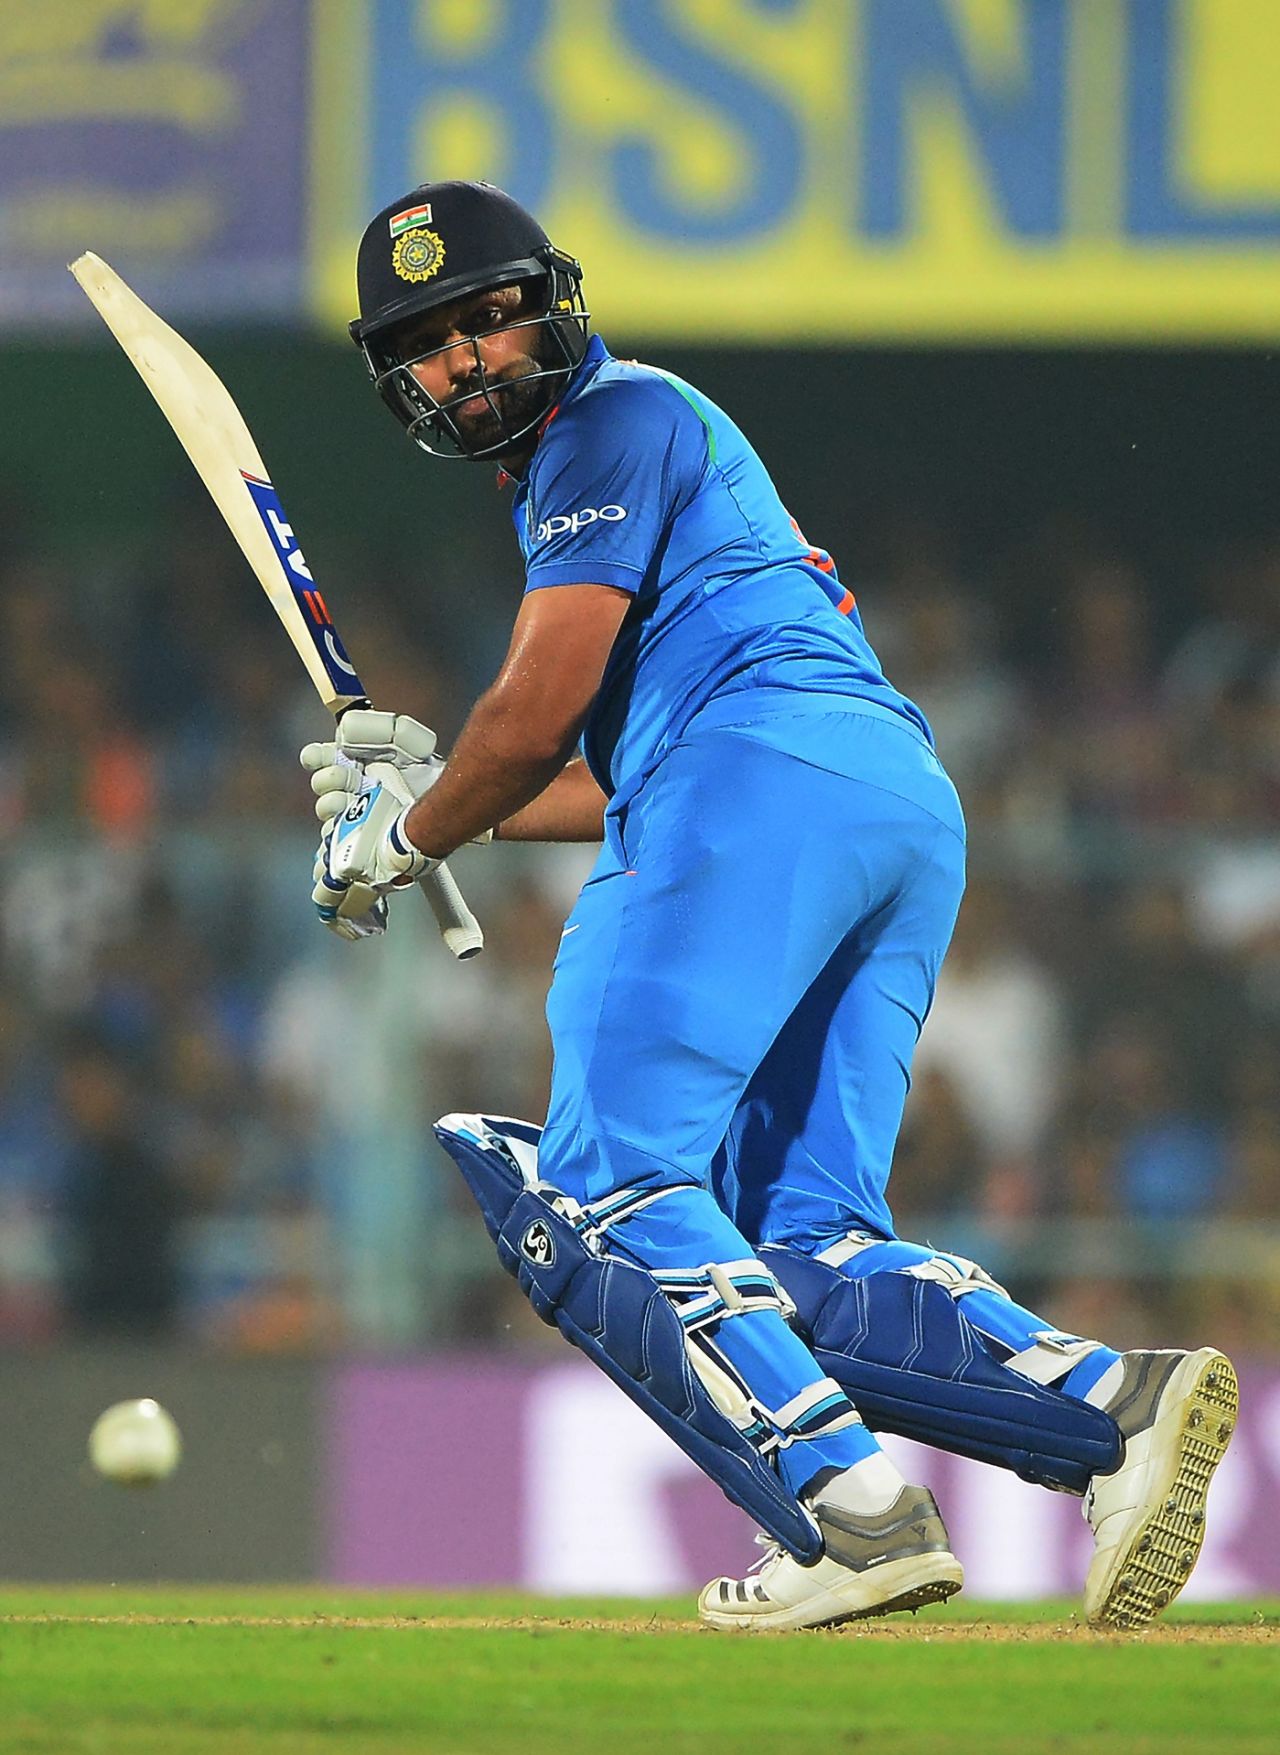 Rohit Sharma flicks the ball to the leg side, India v West Indies, 1st ODI, Guwahati, October 21, 2018